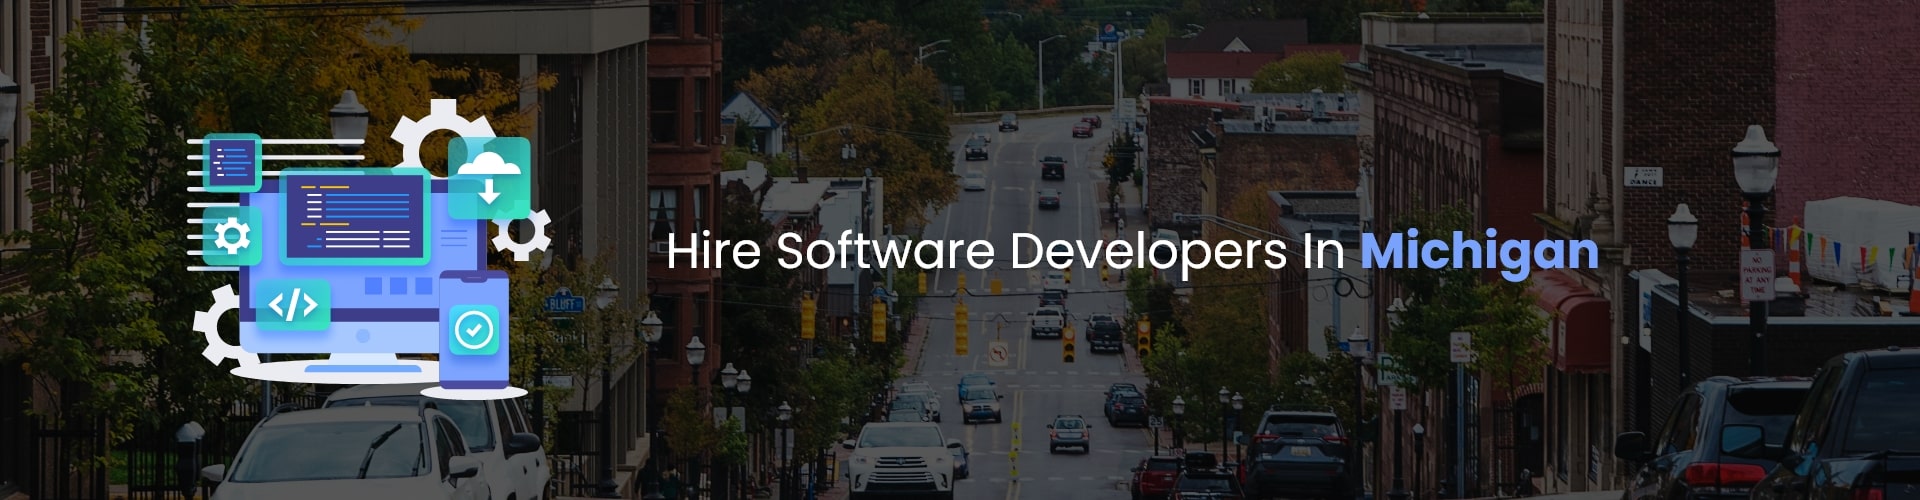 hire software developers in michigan